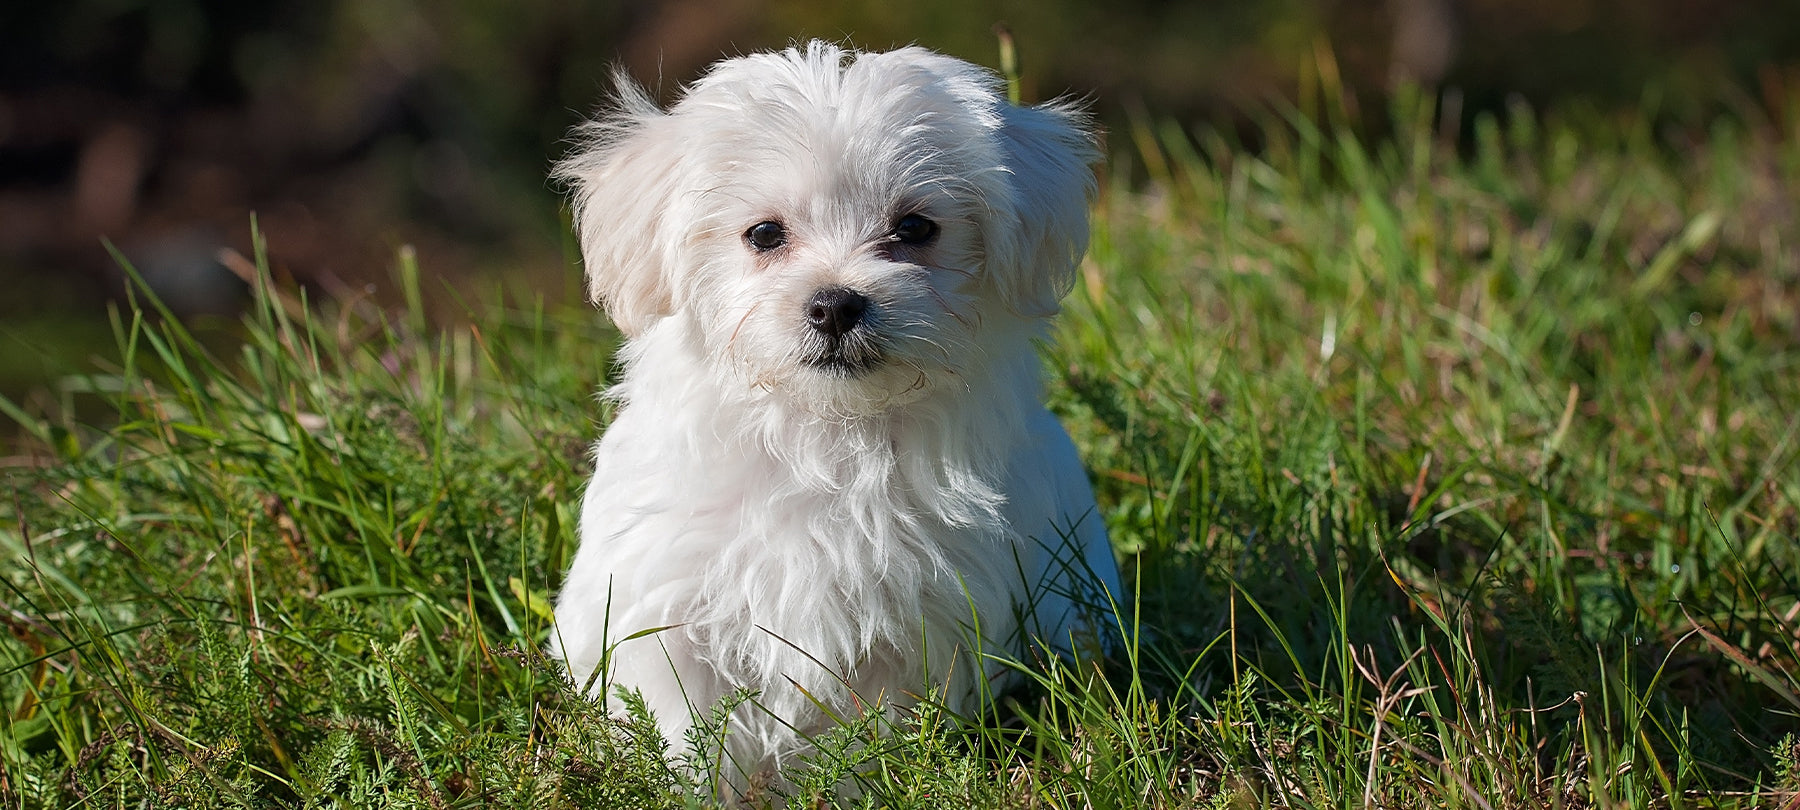 Small white dog in a grass field.